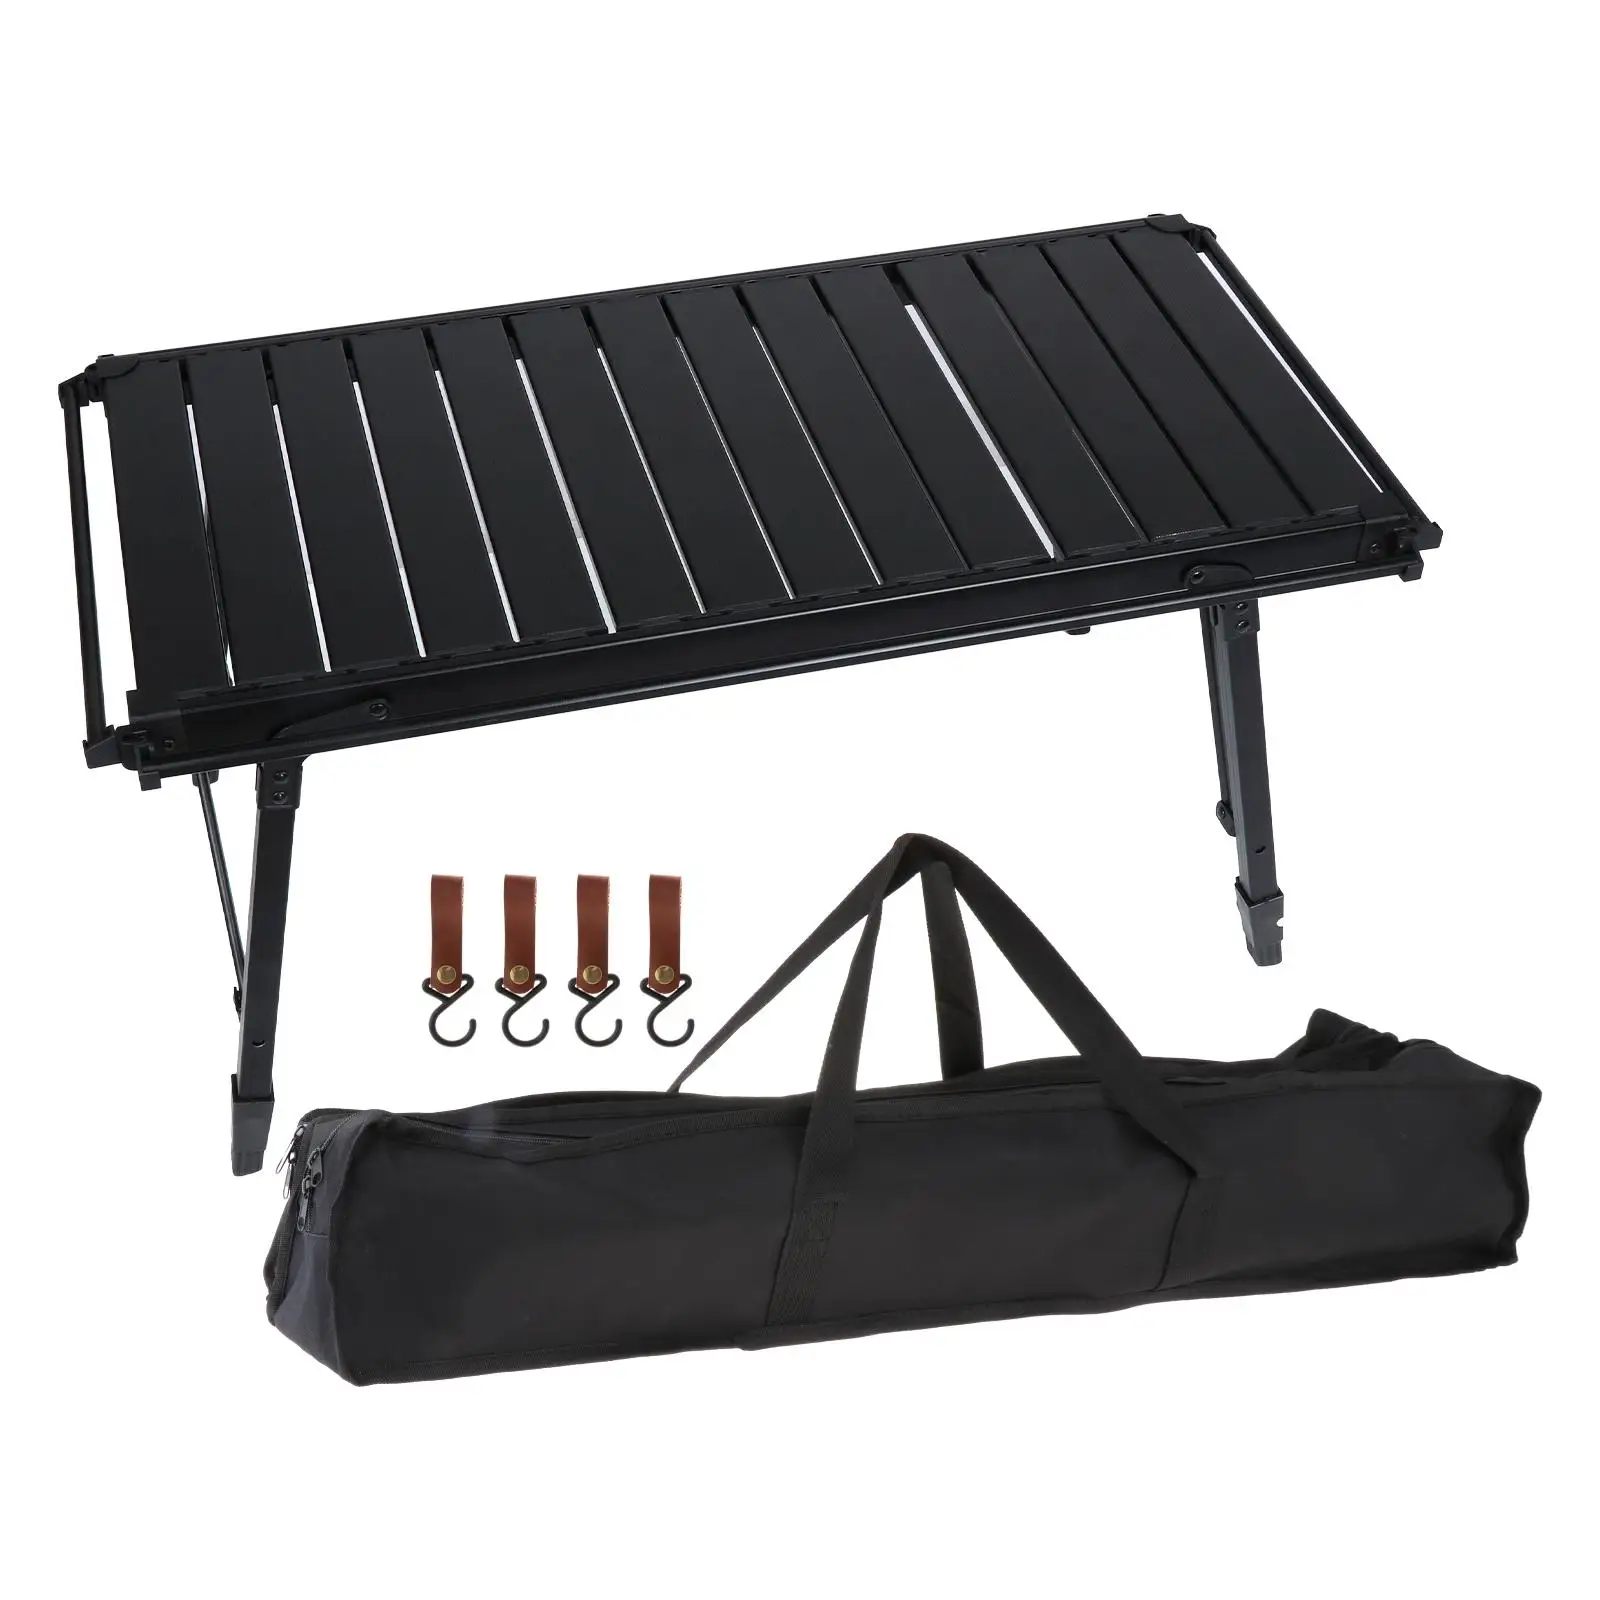 Camping Folding Table Travel Table with Storage Bag Furniture Foldable Picnic Table for Outdoor Balcony Deck Hiking Equipment